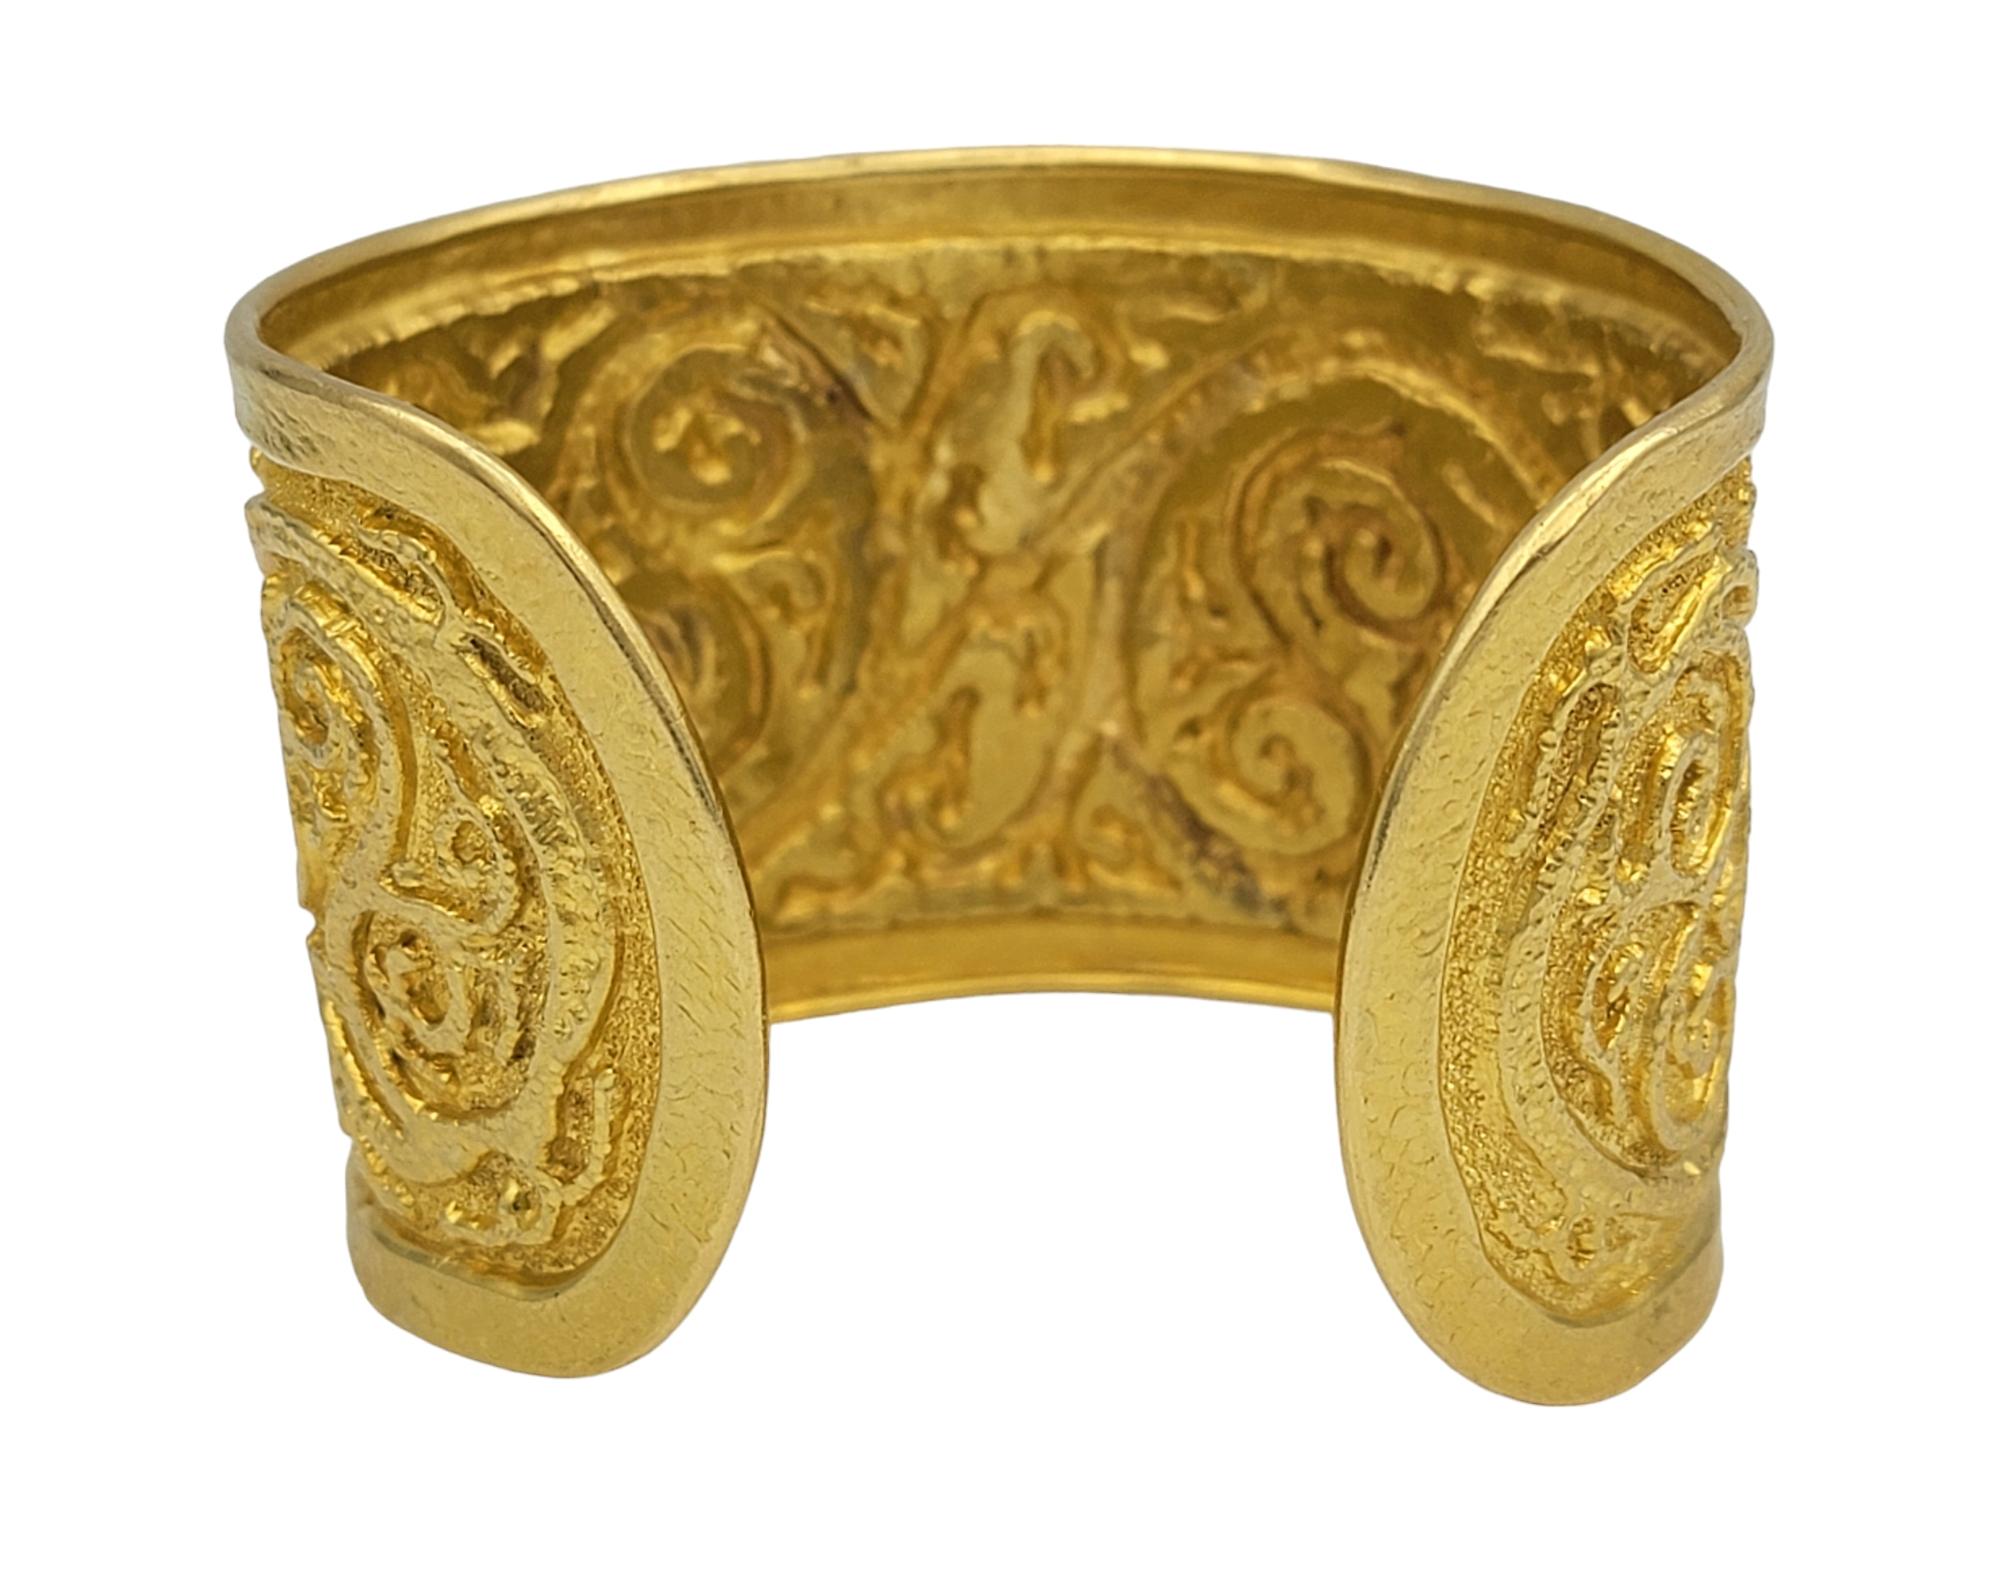 22 Karat Yellow Gold Wide Cuff Bracelet with Multi-Textured Scroll Design For Sale 2